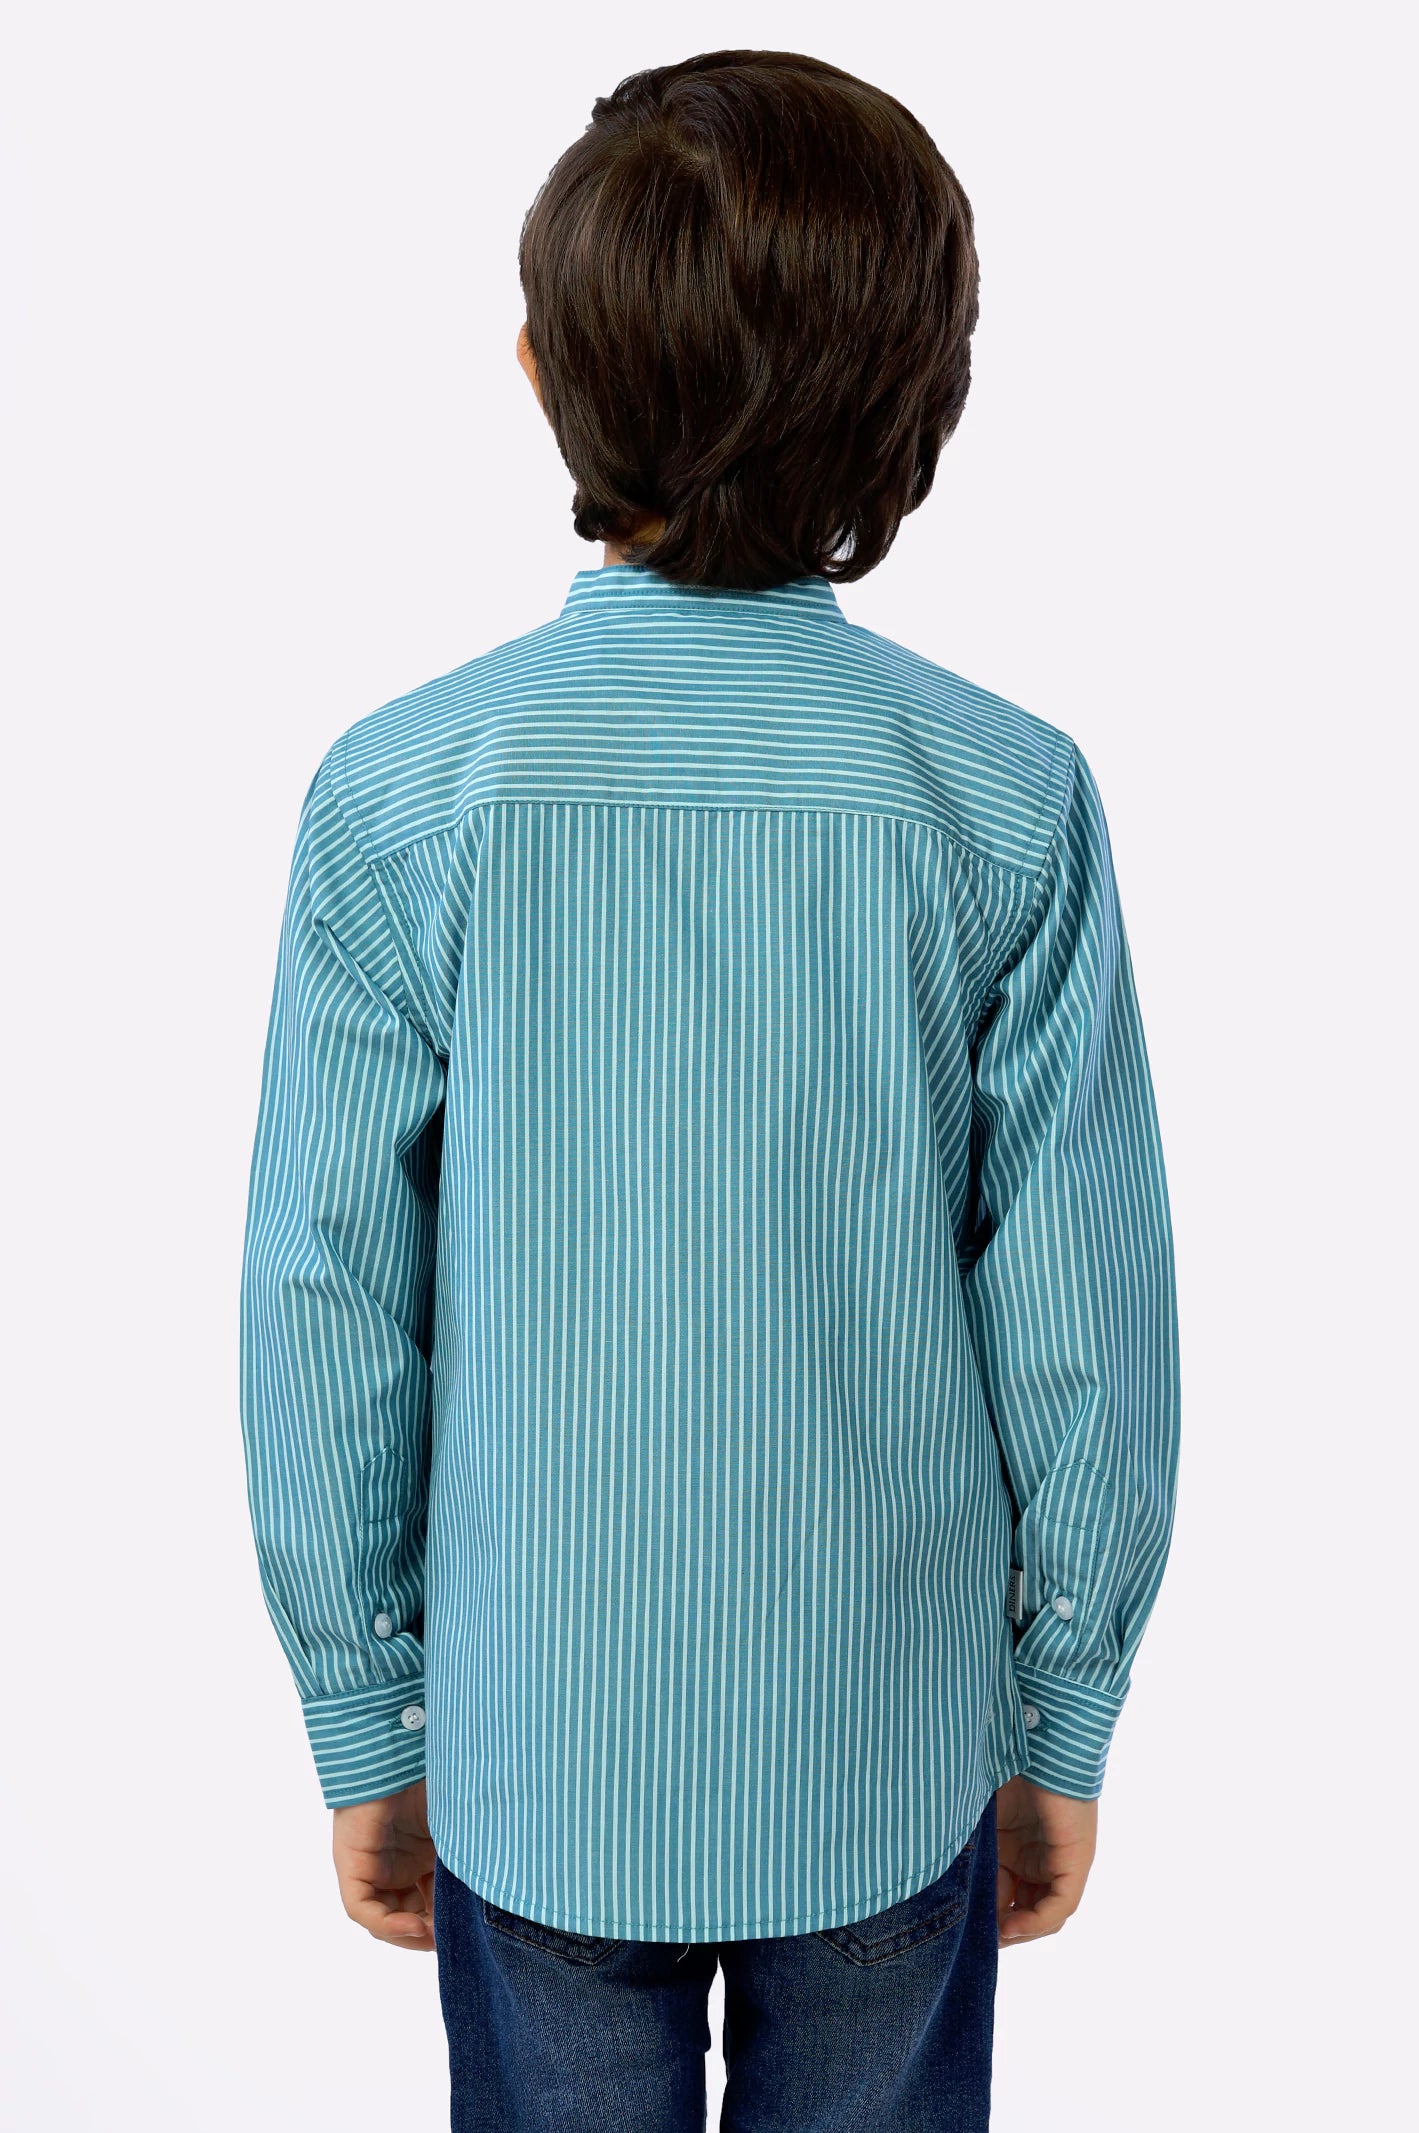 Green Pinstripe Boys Shirt From Diners